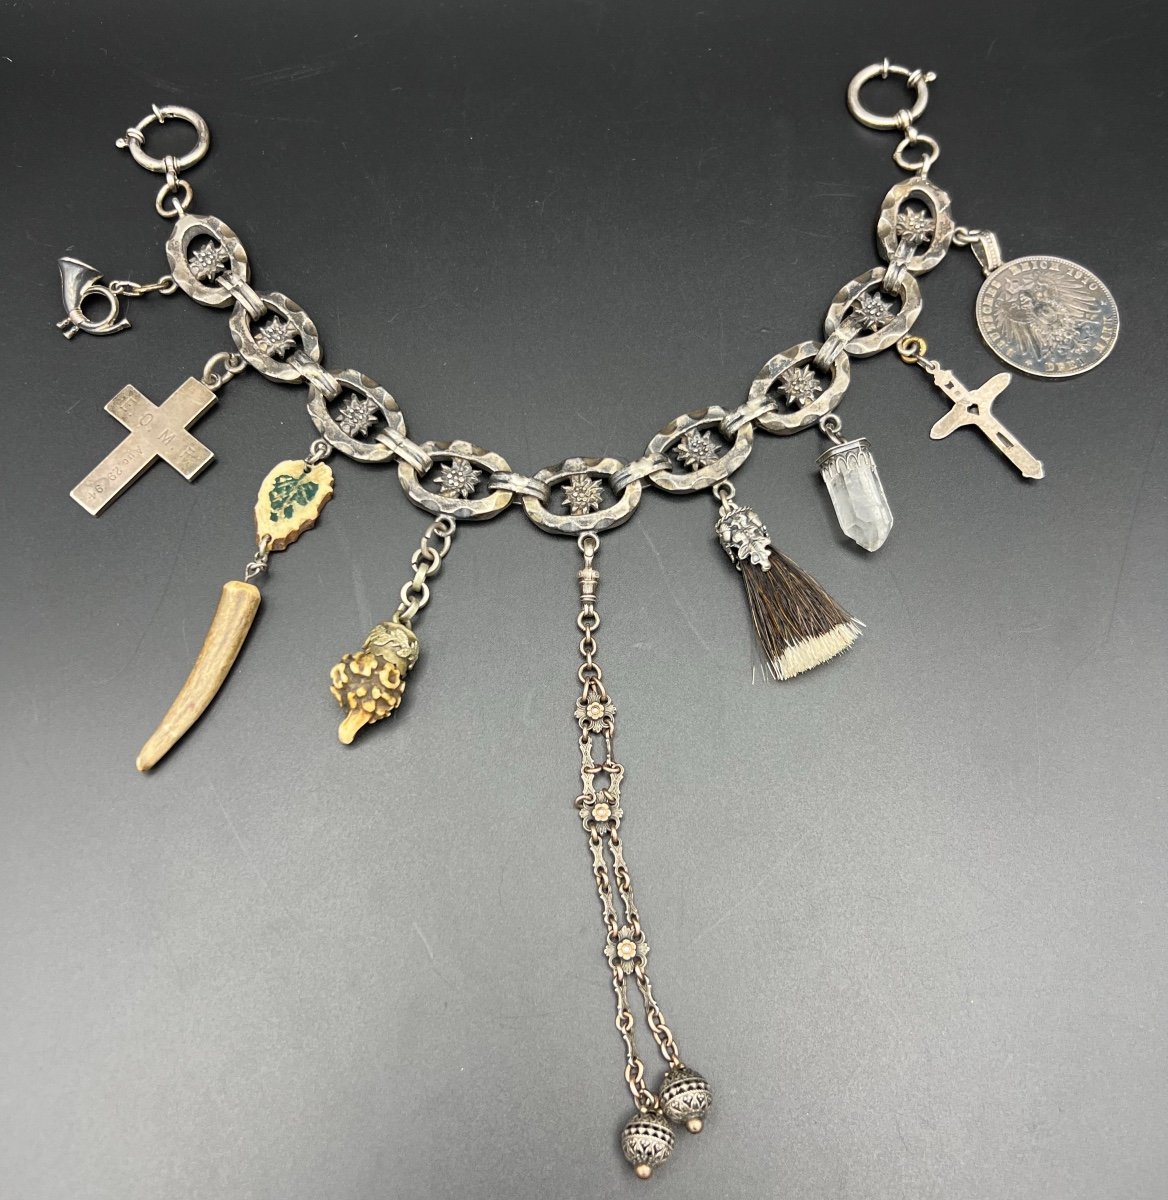 Heavy Silver Hunting Necklace With Several Pendants - Late 19th, Early 20th Century-photo-3